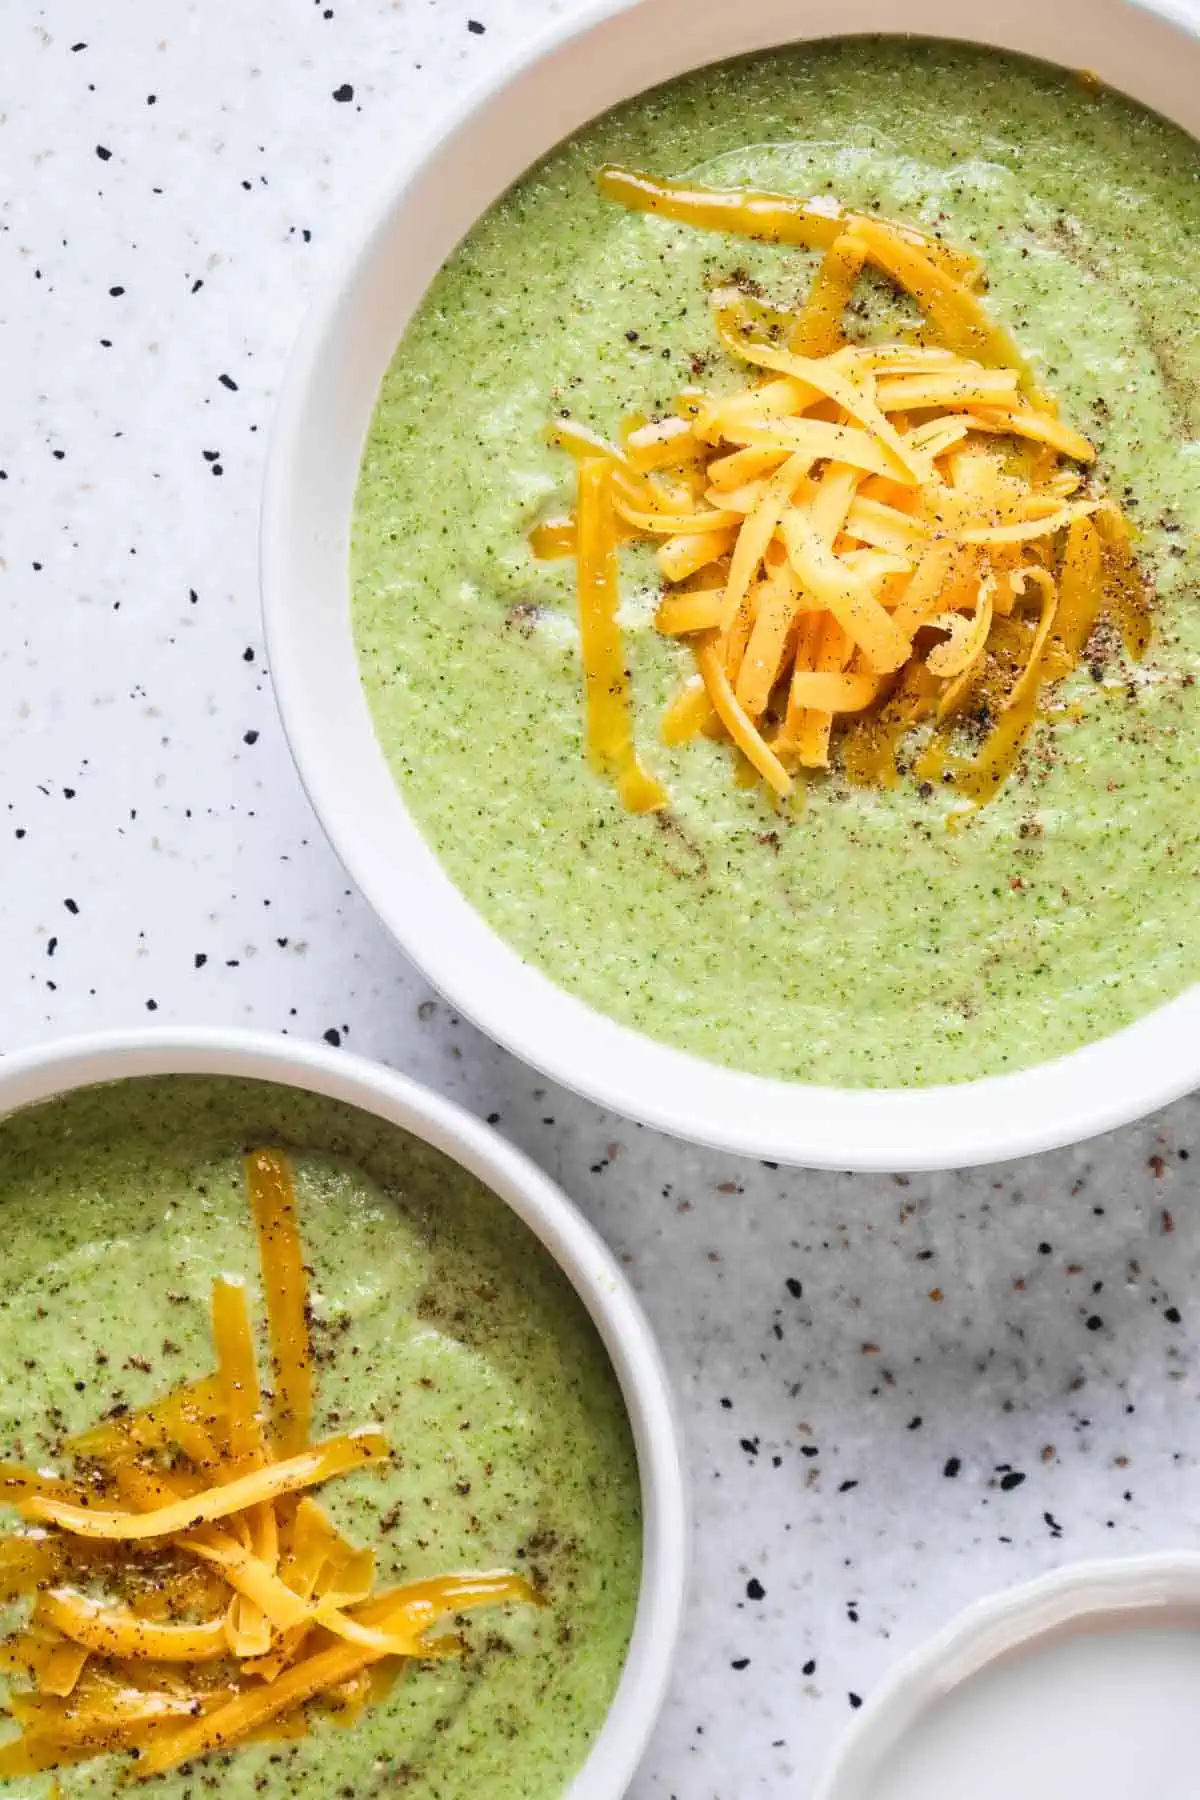 Close up overhead shot of two bowls of cream of broccoli soup with orange cheddar cheese on top.